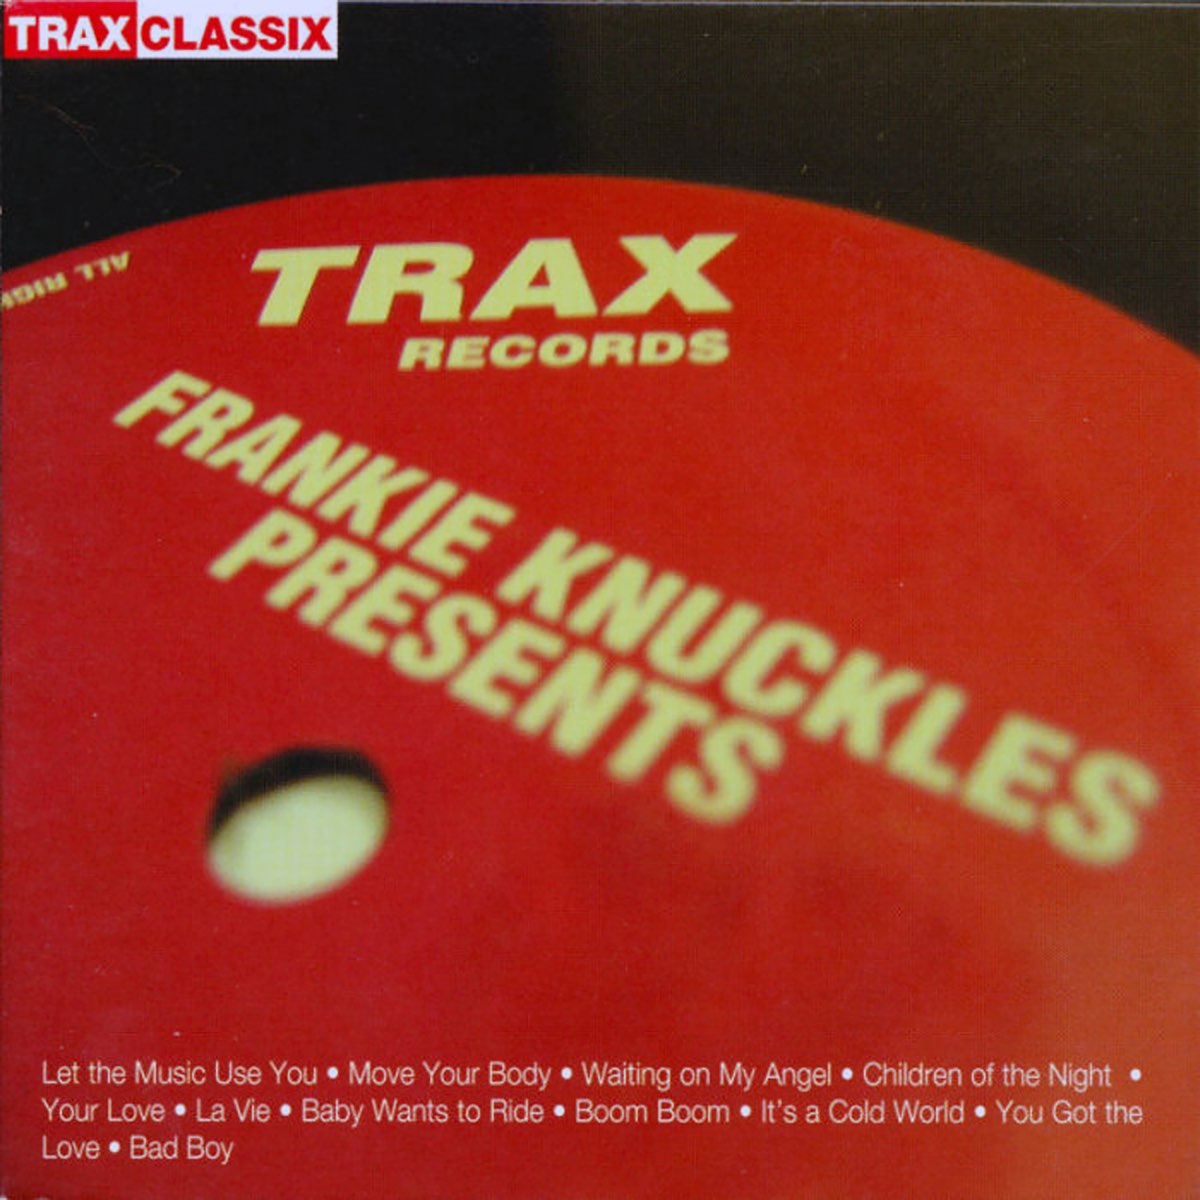 His Greatest Hits from Trax / Frankie Knuckles